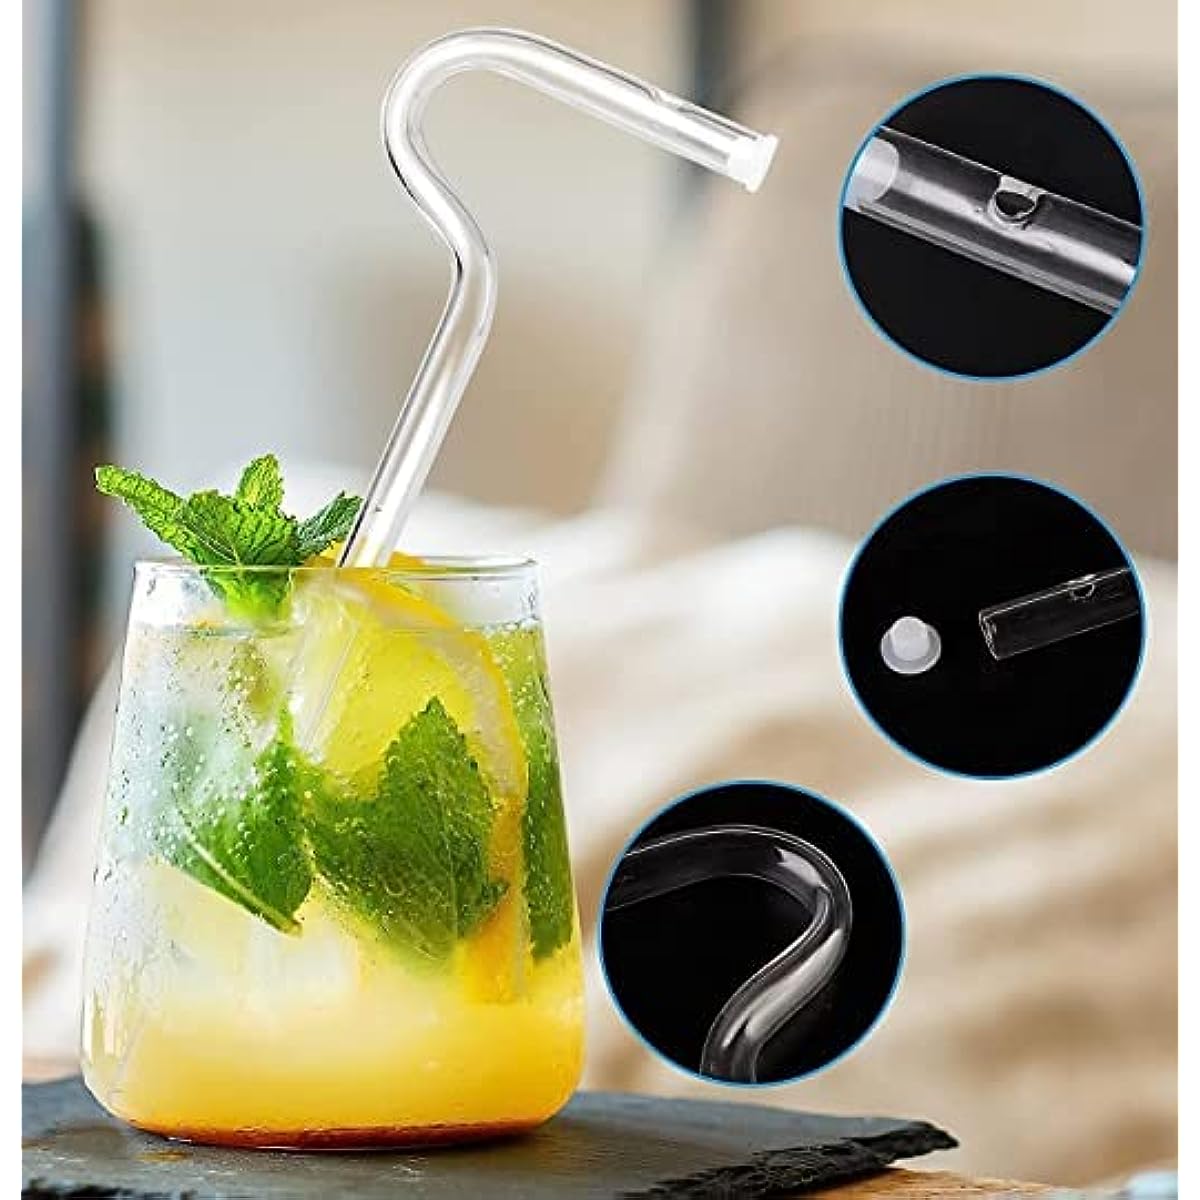 Wenoanew Anti Wrinkle Straw Flute Style Design for Engaging No Wrinkle Straw Say Goodbye to Wrinkles with Reusable Glass Drinking Lip Straw